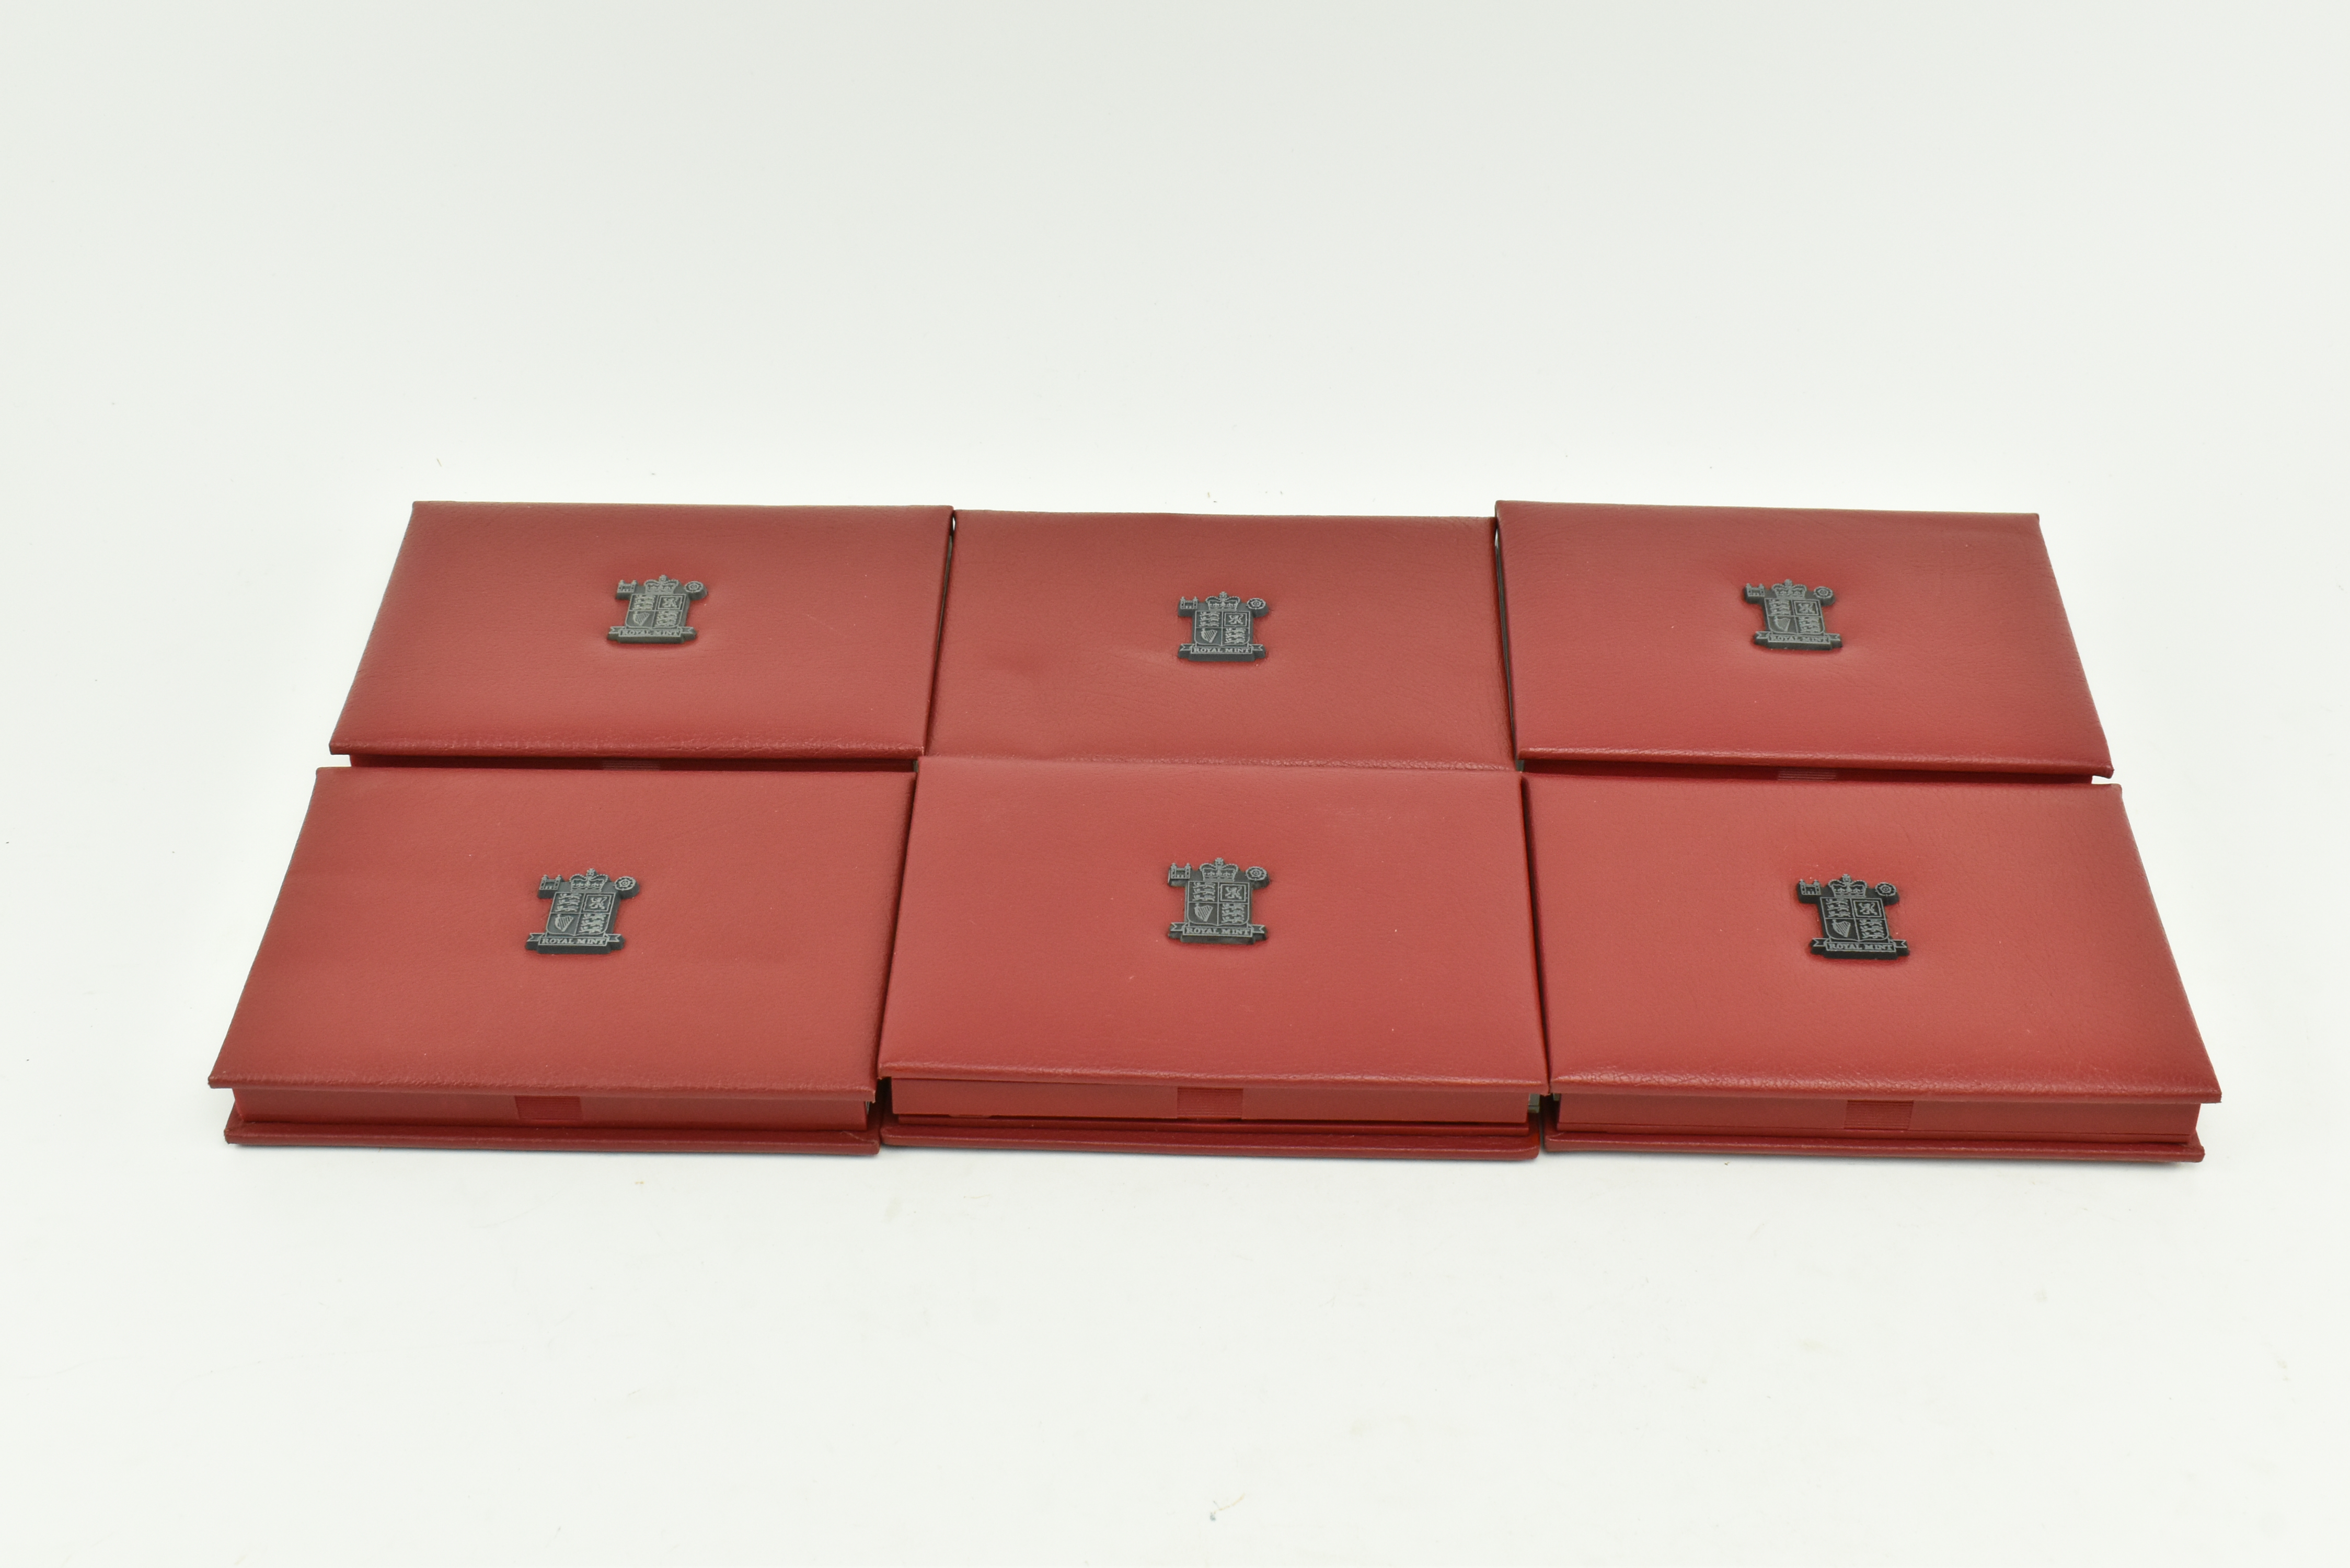 SIX UNITED KINGDOM DELUXE COIN PROOF SETS, 1999-2004 - Bild 8 aus 8